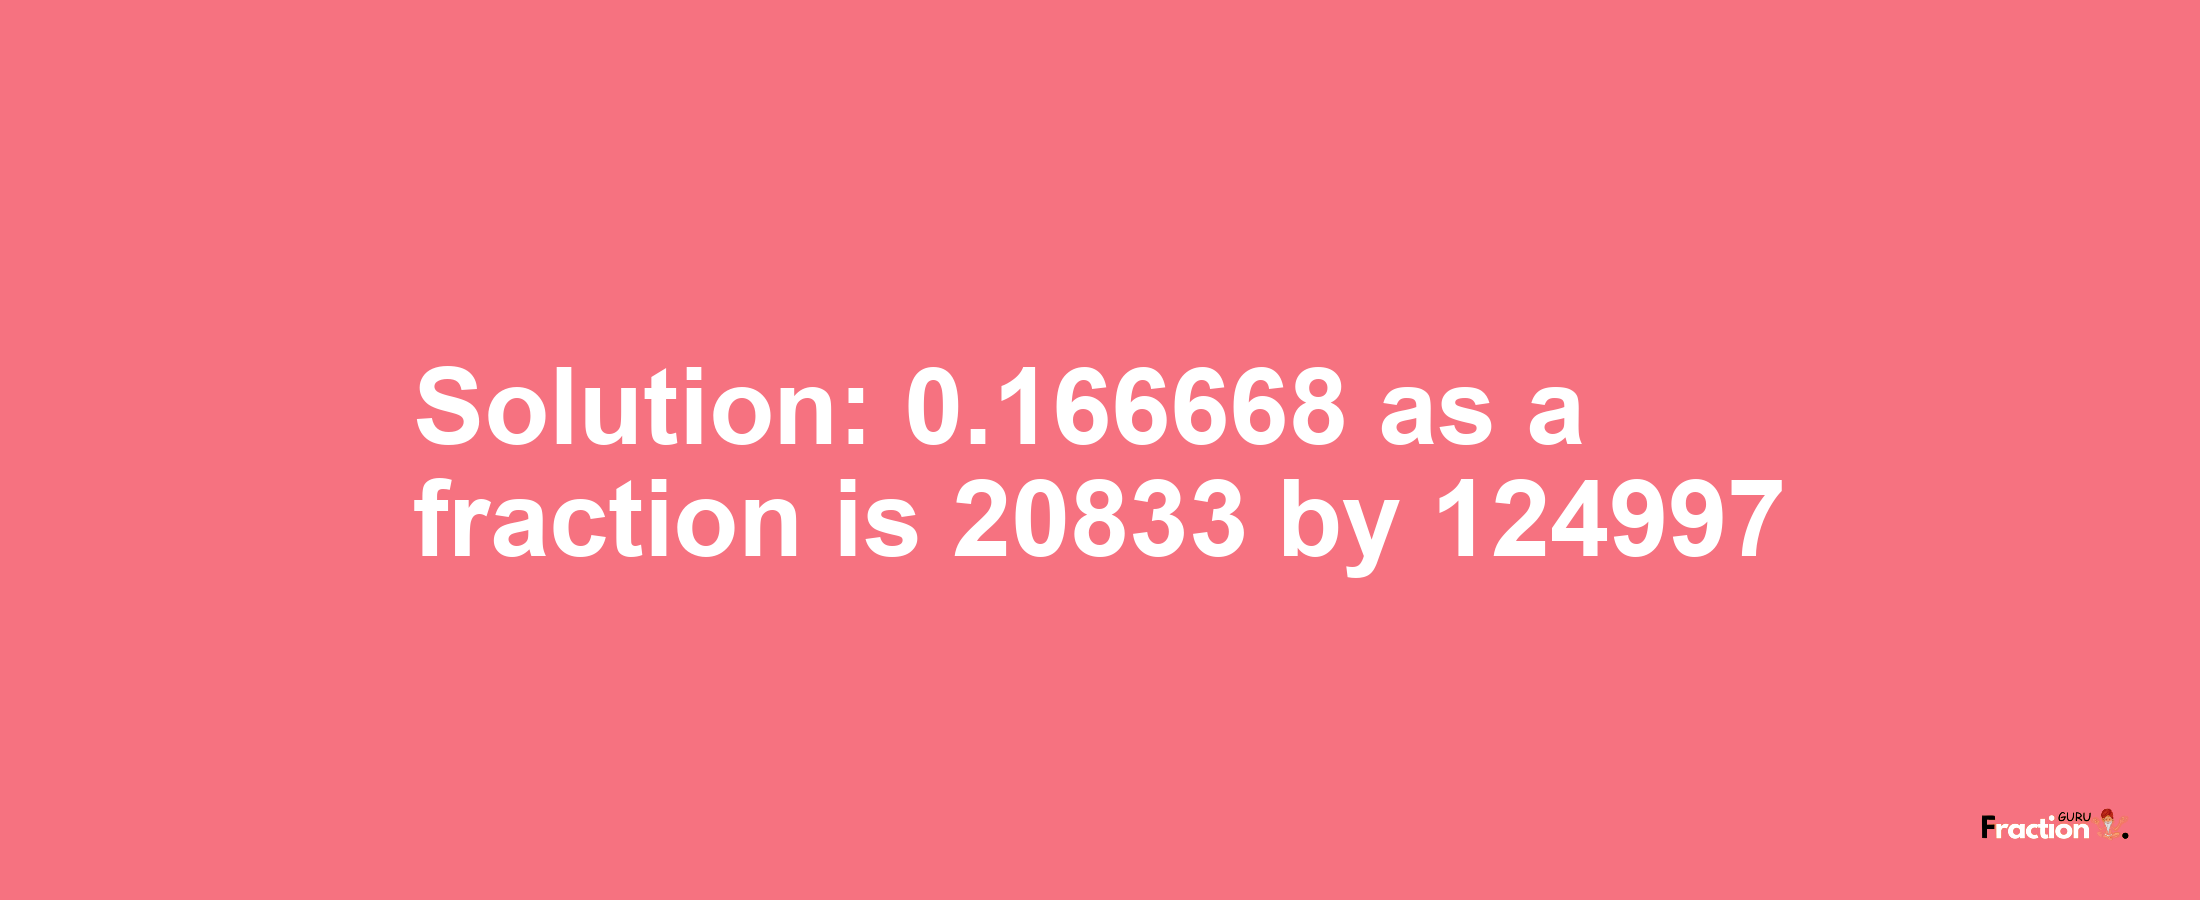 Solution:0.166668 as a fraction is 20833/124997